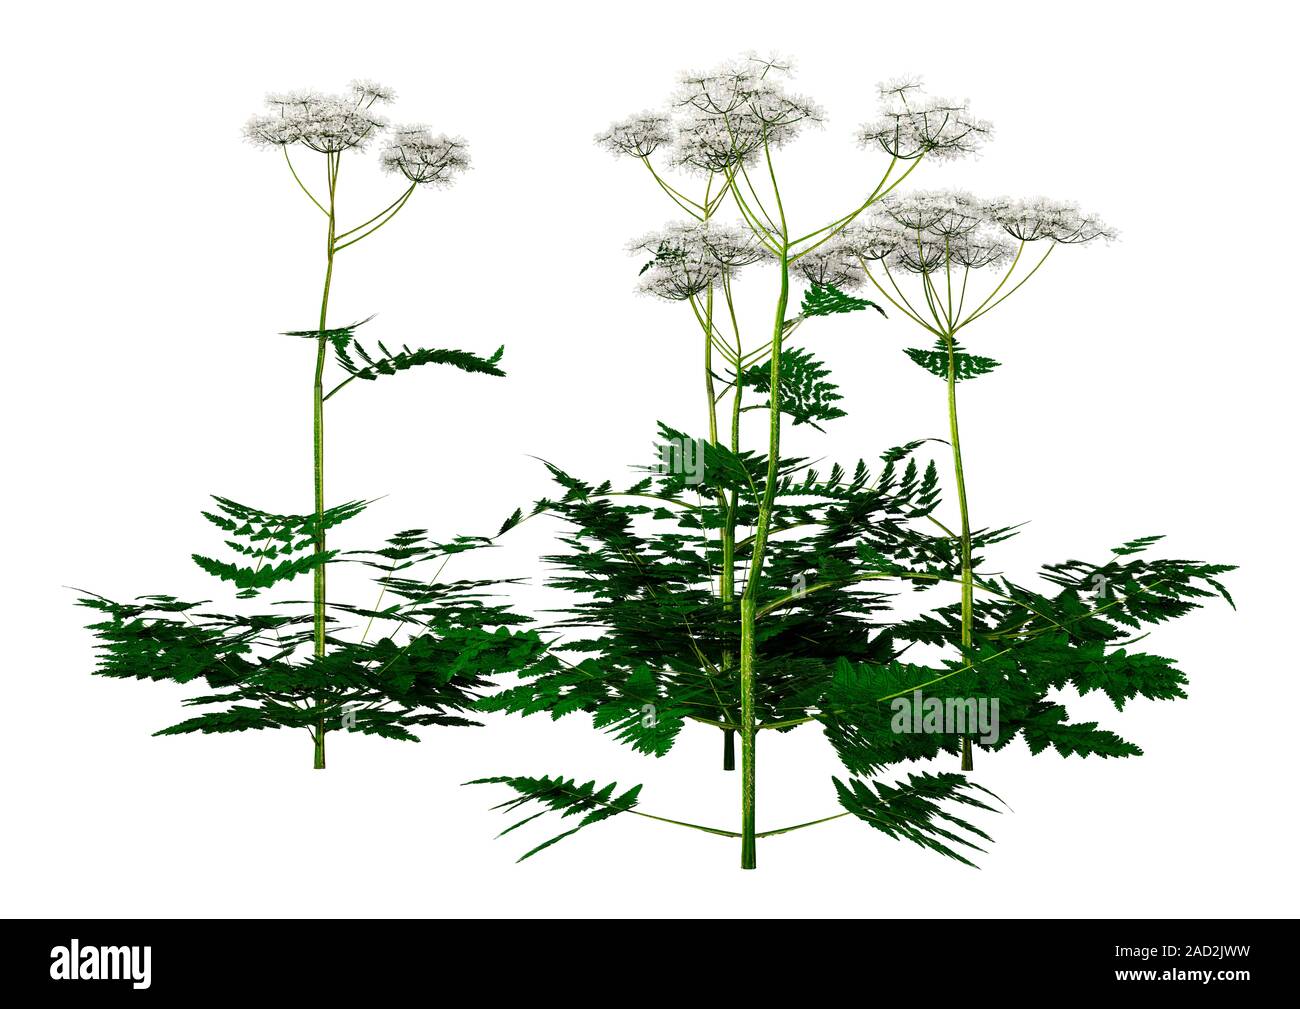 3D illustration of cow parsley plants isolated on white background Stock Photo